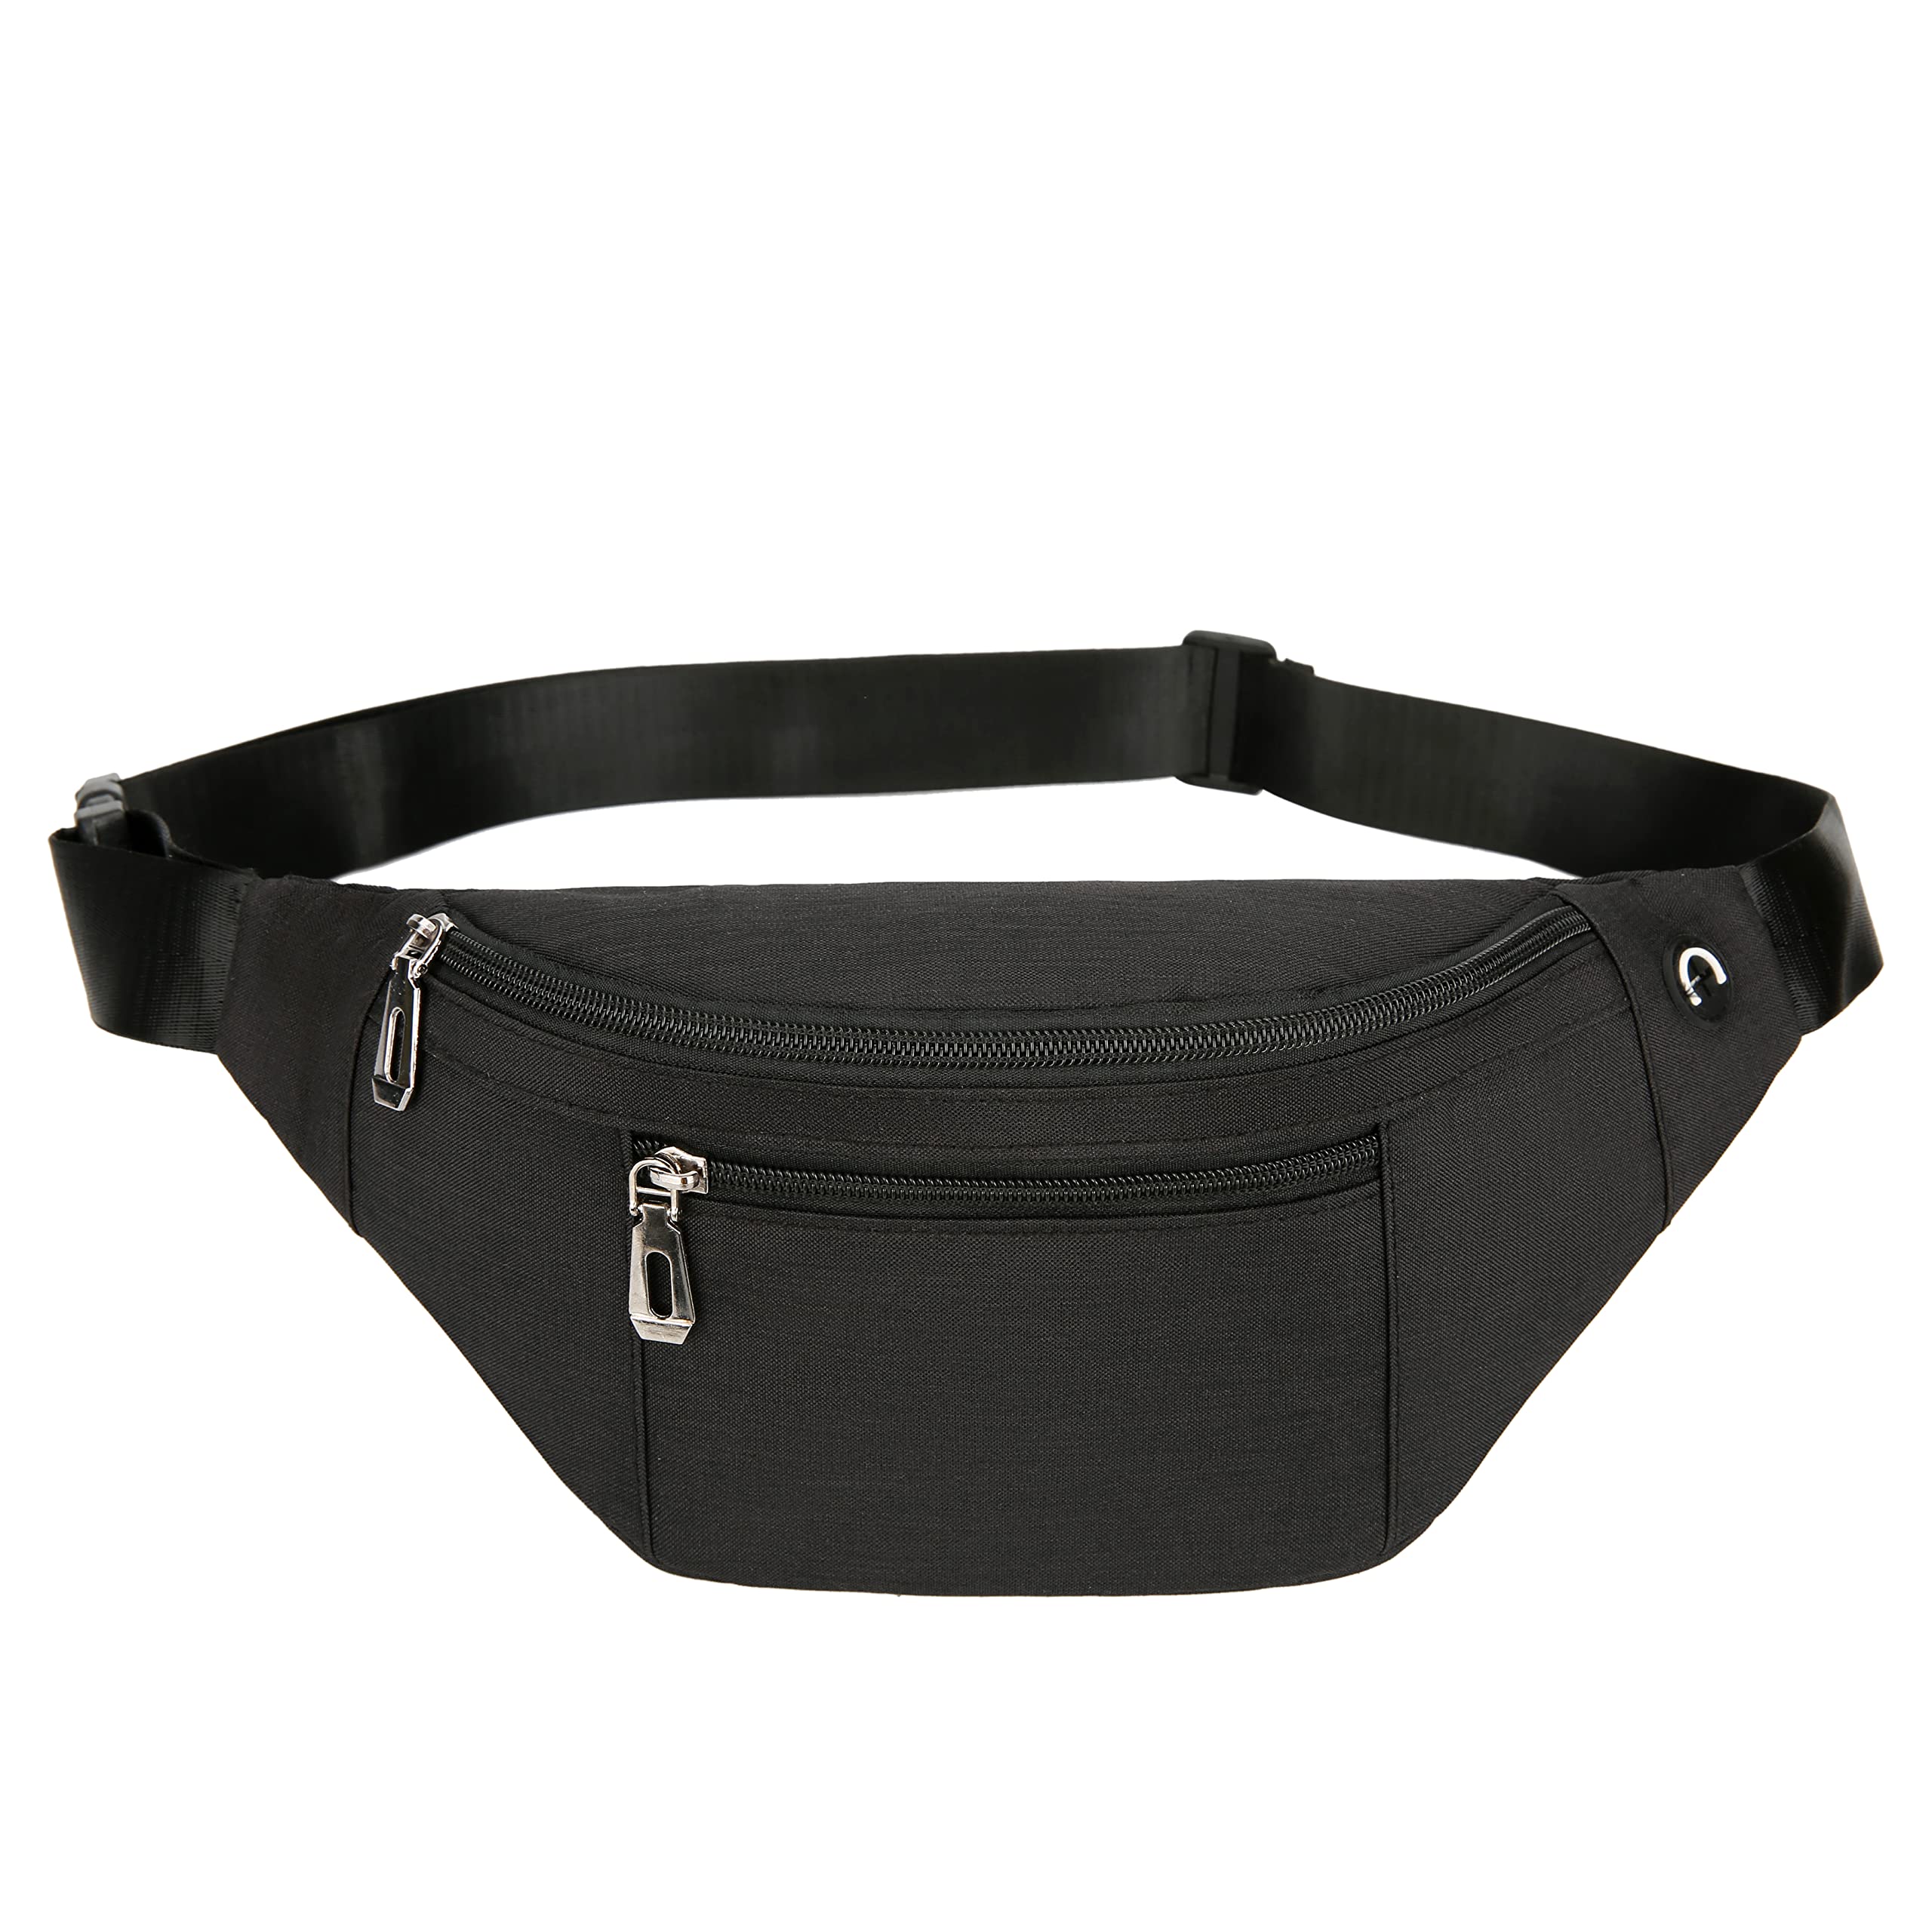 pack of 2 Waist Bag for Men Women Chest Fanny Pack with Adjustable